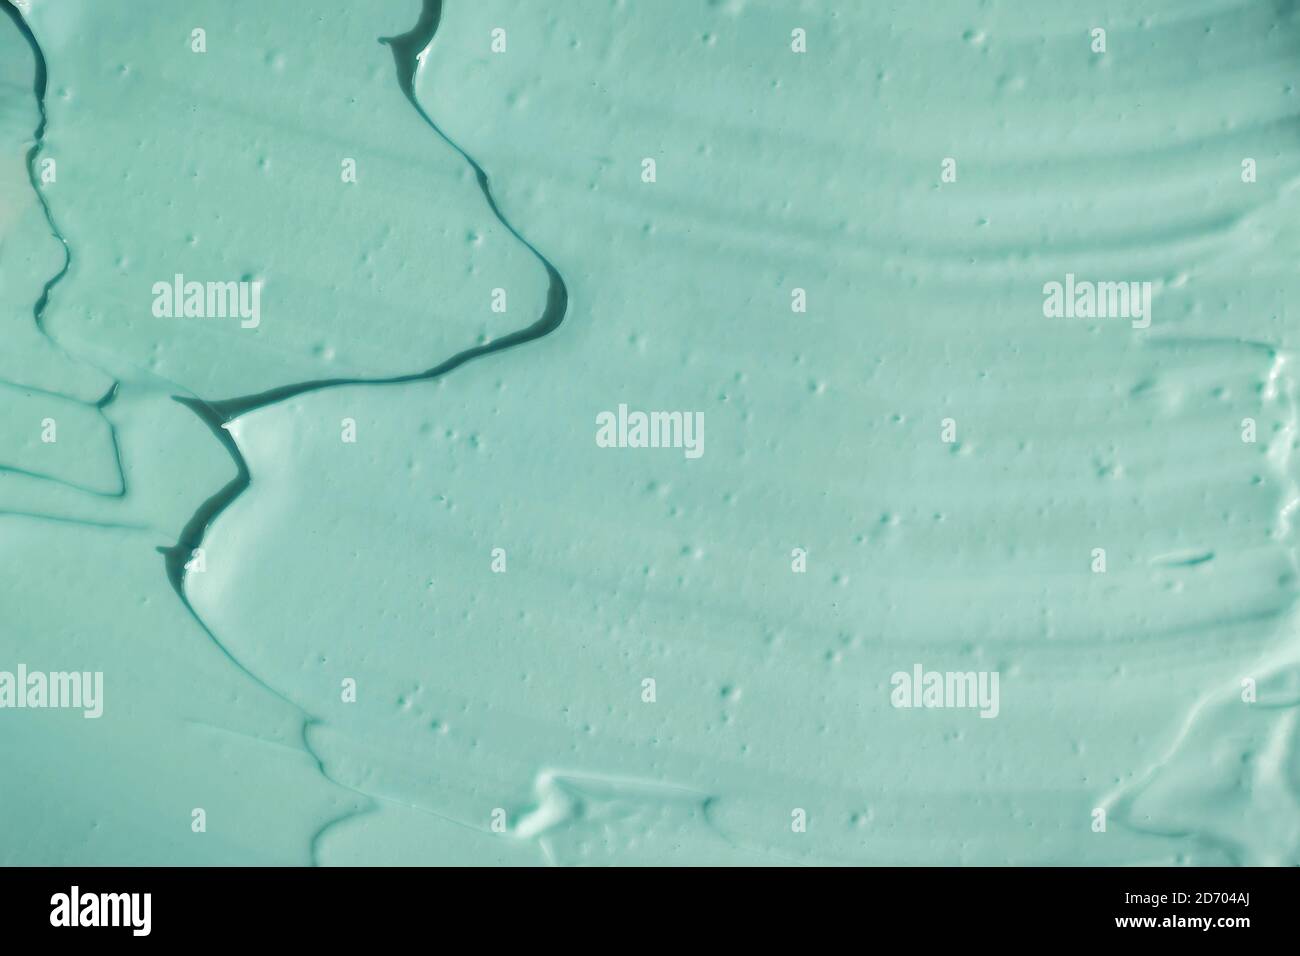 Blue cosmetic clay texture close up. Stock Photo